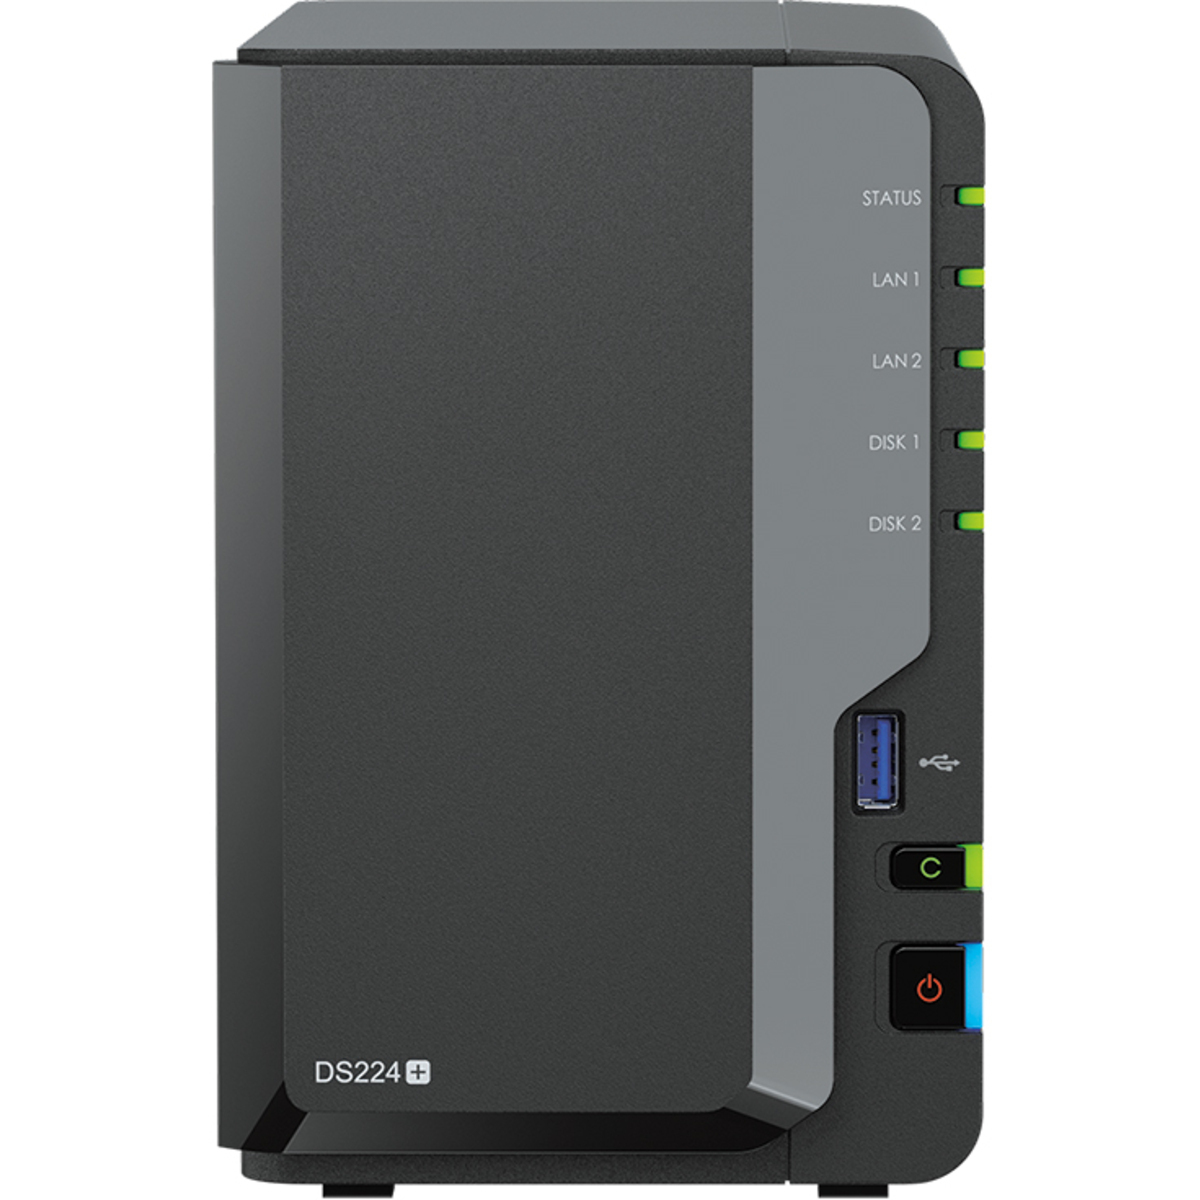 Synology DiskStation DS224+ 14tb 2-Bay Desktop Personal / Basic Home / Small Office NAS - Network Attached Storage Device 1x14tb Seagate IronWolf Pro ST14000NT001 3.5 7200rpm SATA 6Gb/s HDD NAS Class Drives Installed - Burn-In Tested - ON SALE - FREE RAM UPGRADE DiskStation DS224+